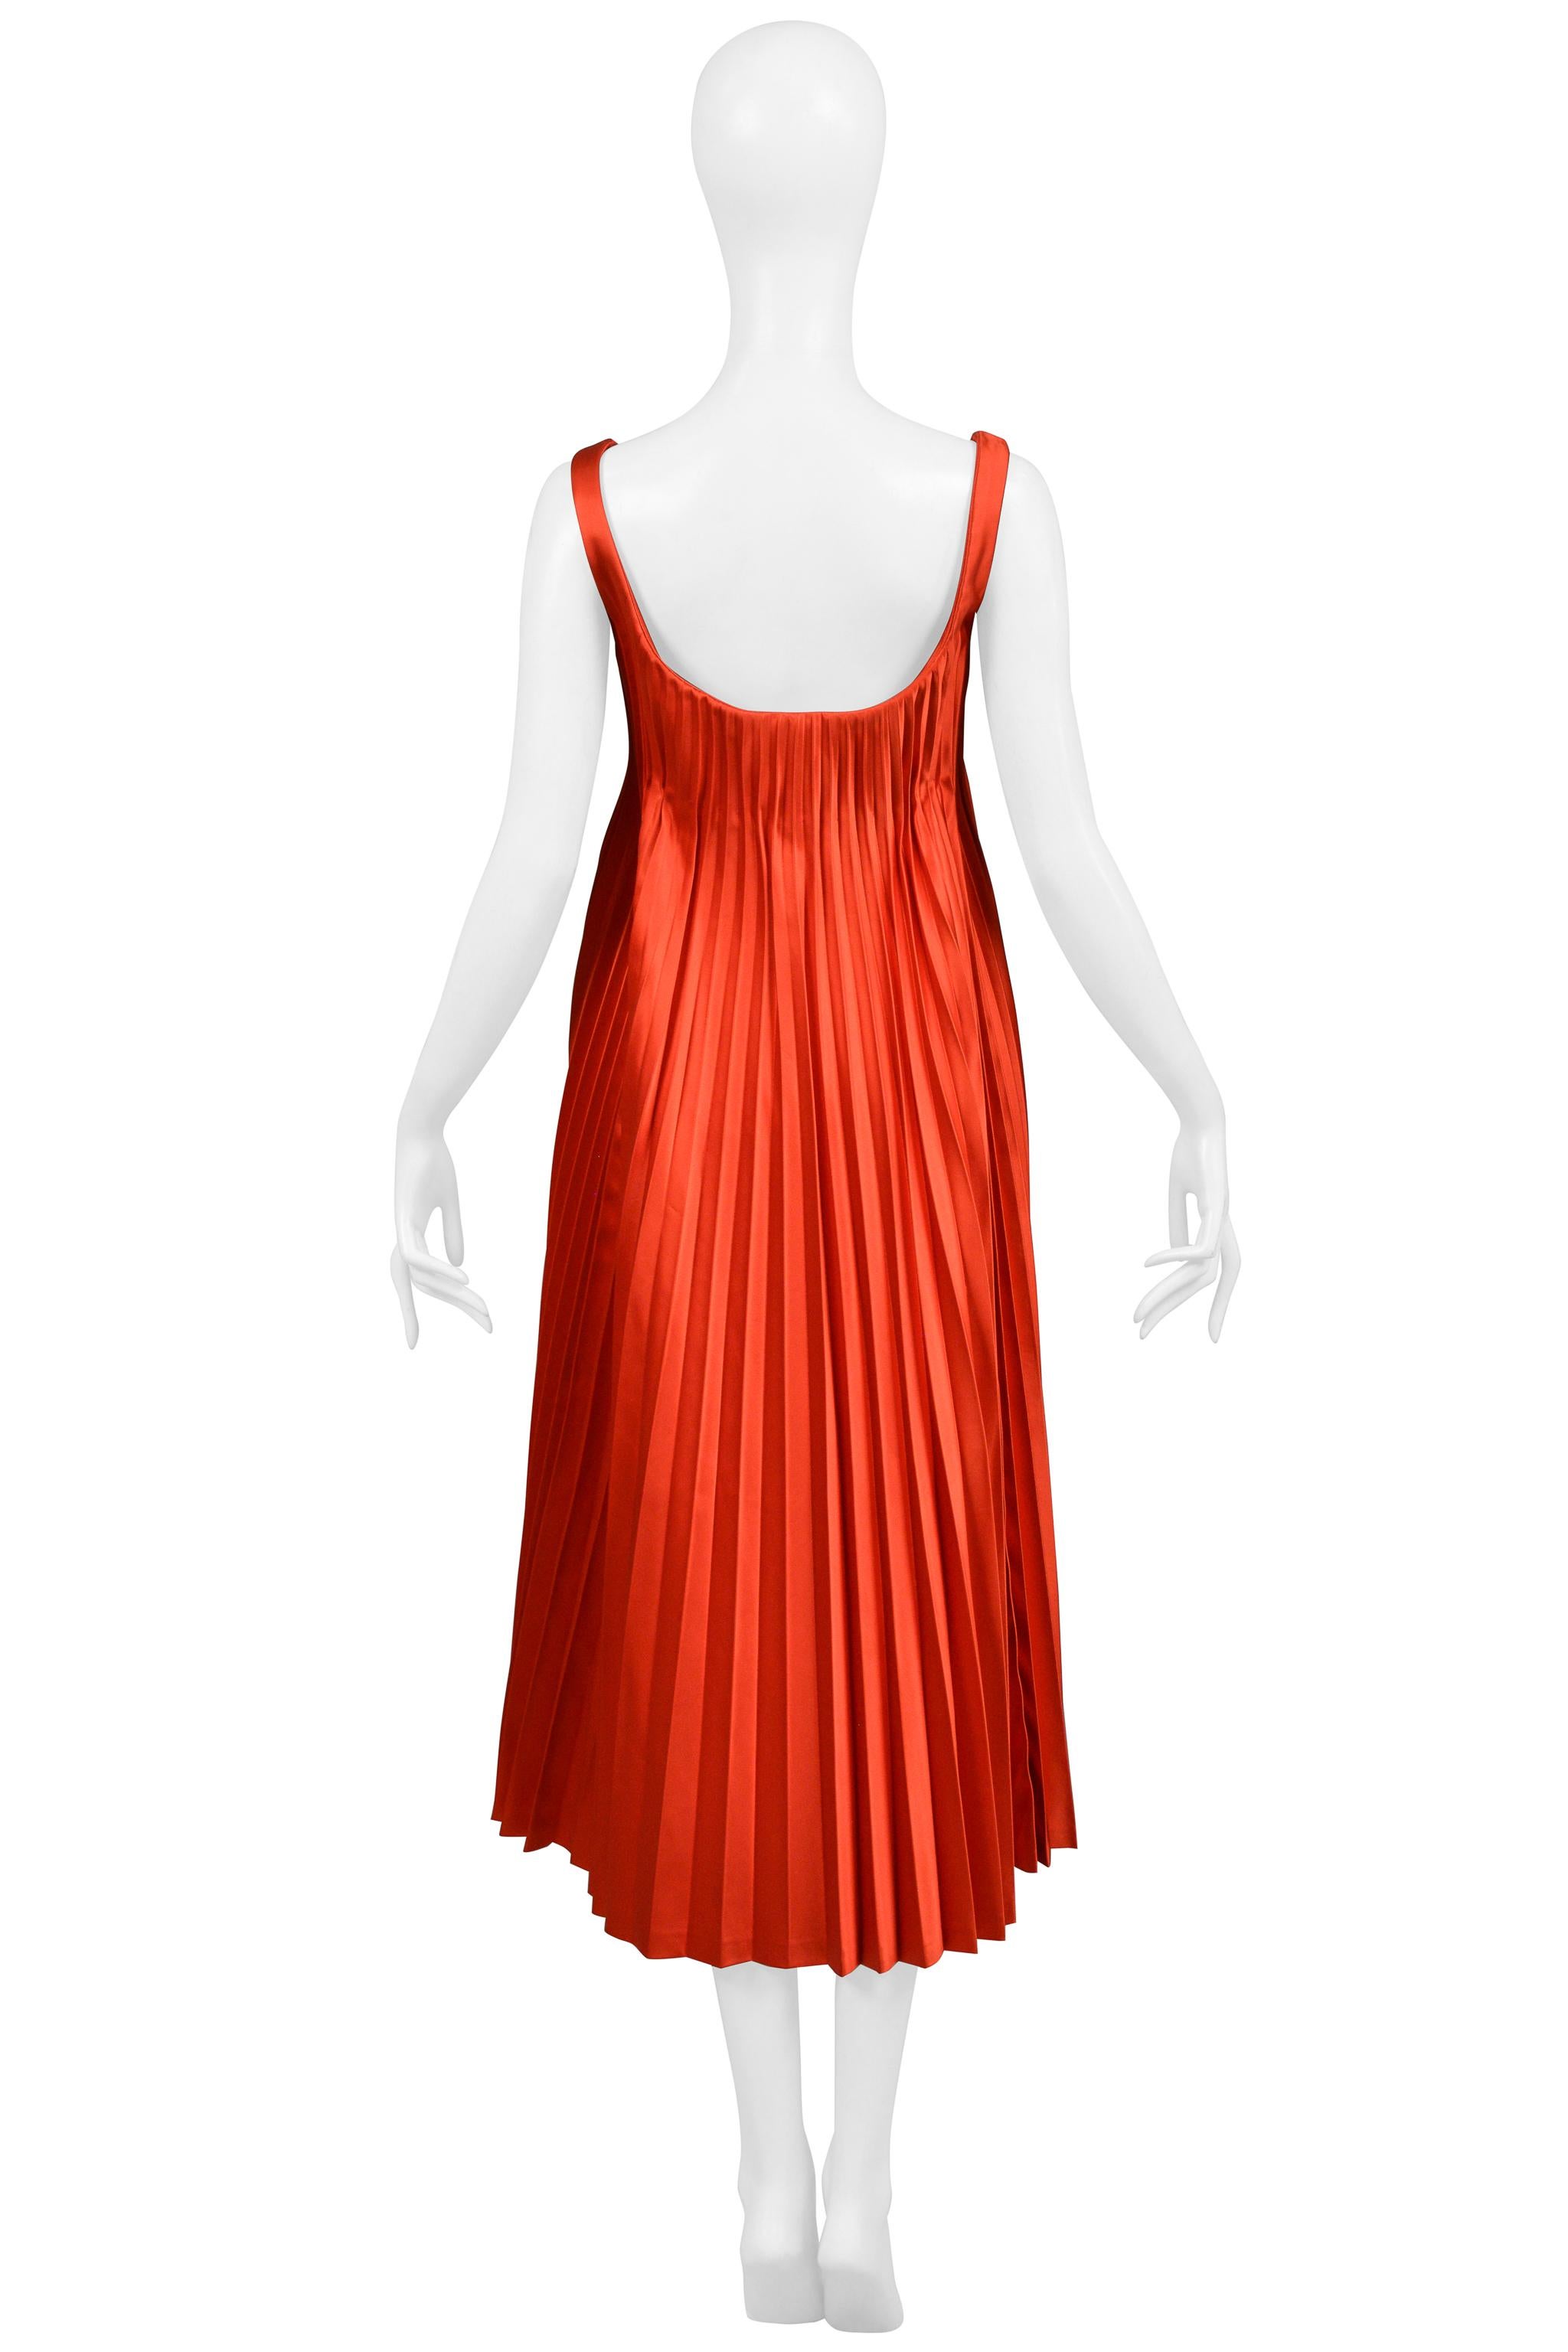 Alexander McQueen Red Satin Pleated Cocktail Dress 2003 For Sale 3